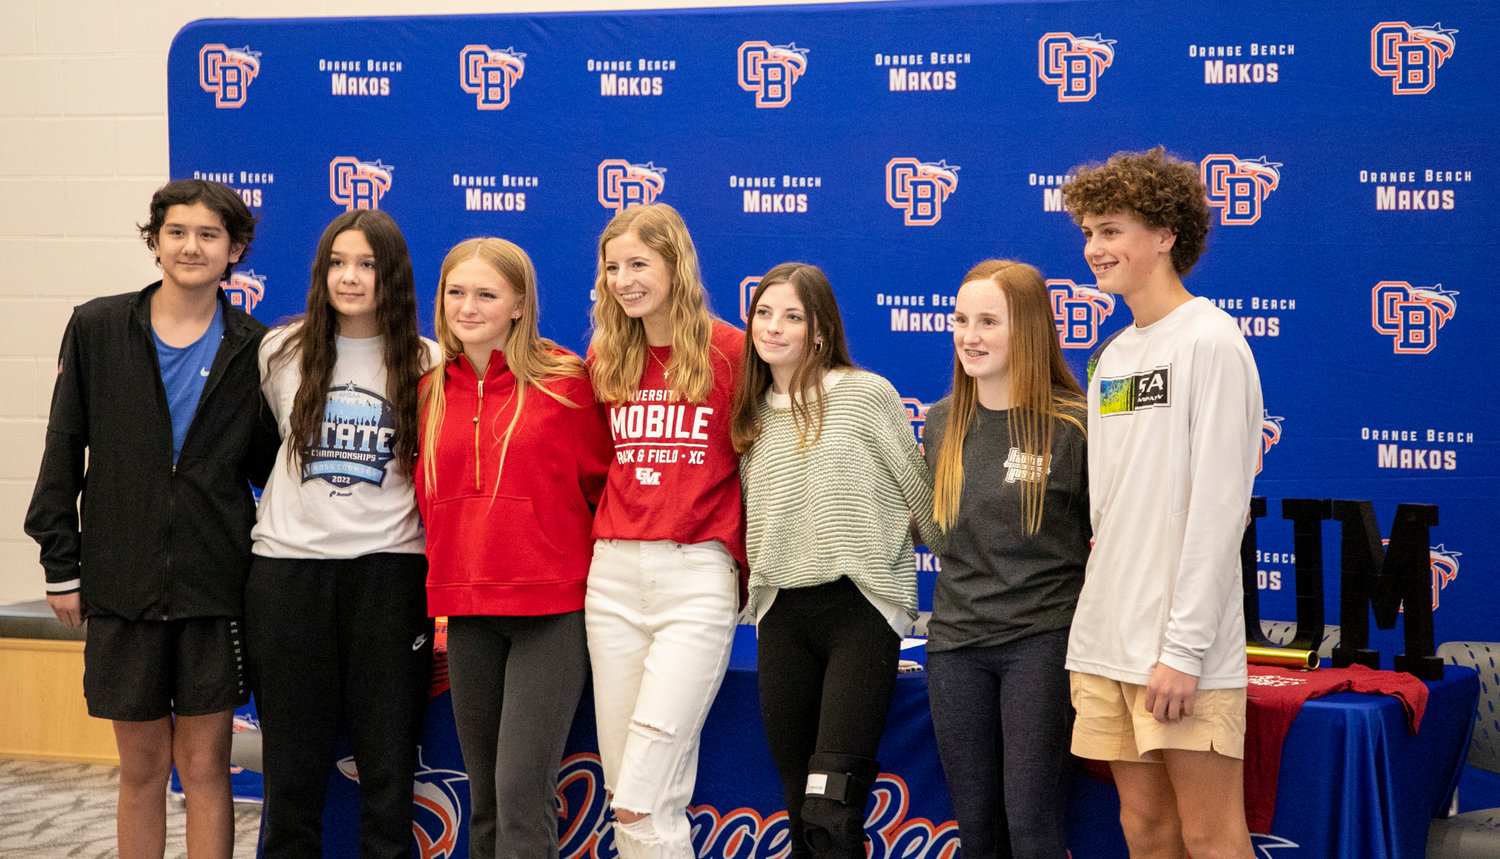 Orange Beach cross country runners celebrated their teammate Claire Atkins signing with the University of Mobile Ram squad after the signing ceremony in the media center at the high school Wednesday, Jan. 18.